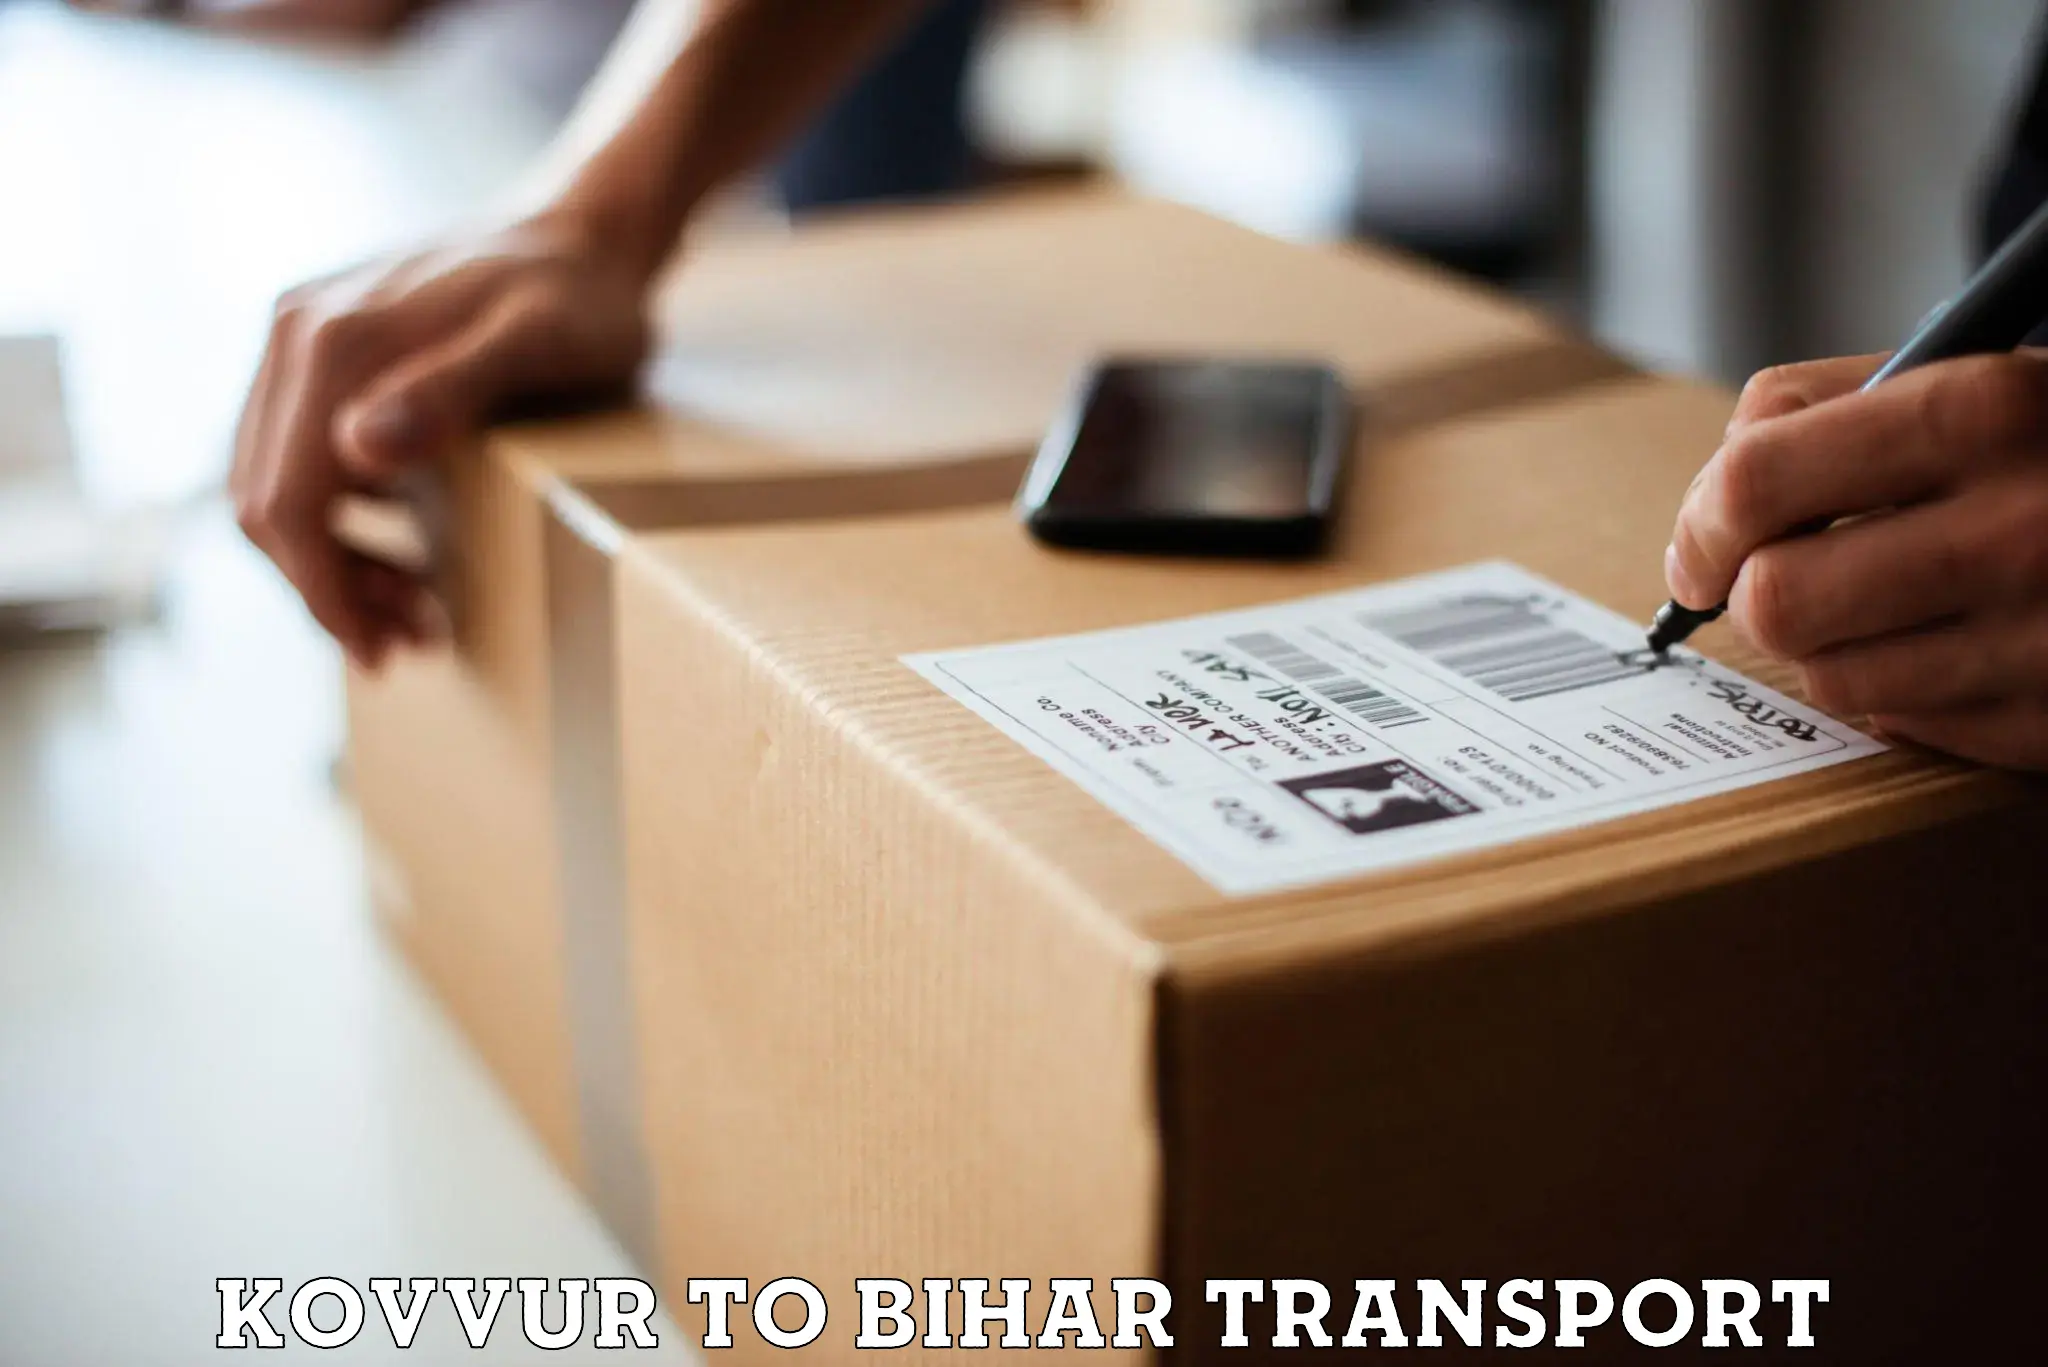 Package delivery services Kovvur to Thakurganj